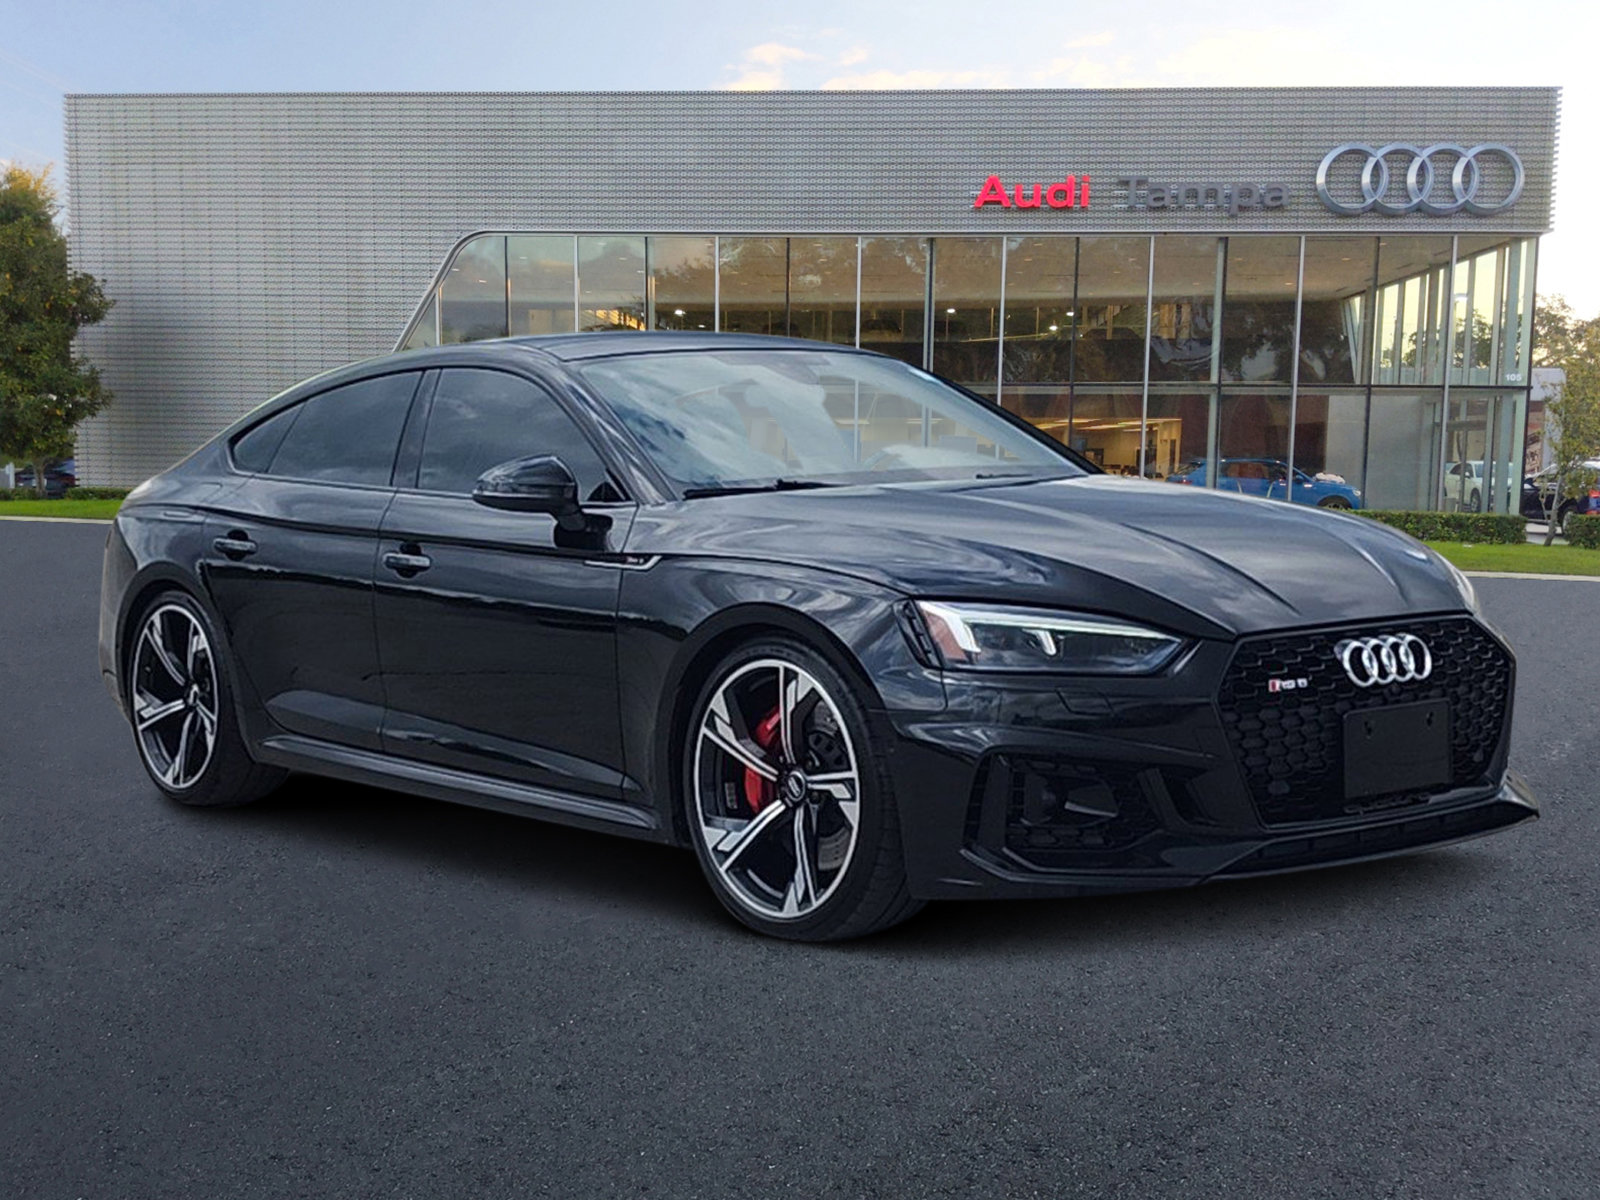 Used 2019 Audi RS 5 for Sale Right Now - Autotrader